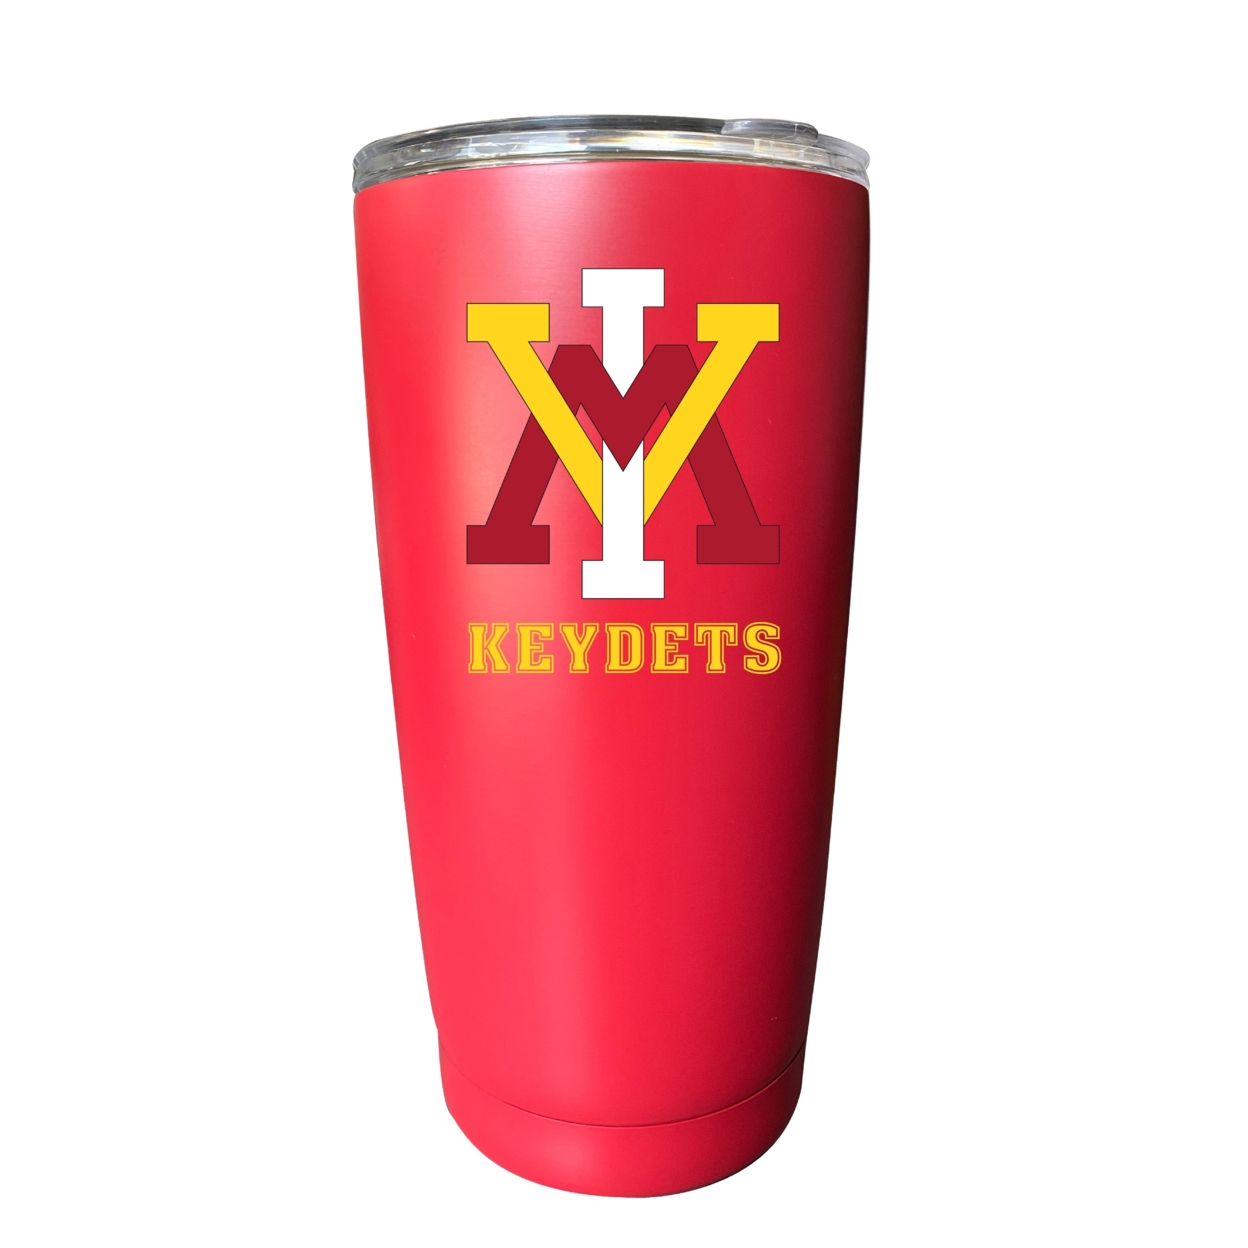 VMI Keydets 16 Oz Insulated Stainless Steel Tumbler - Choose Your Color. - Seafoam